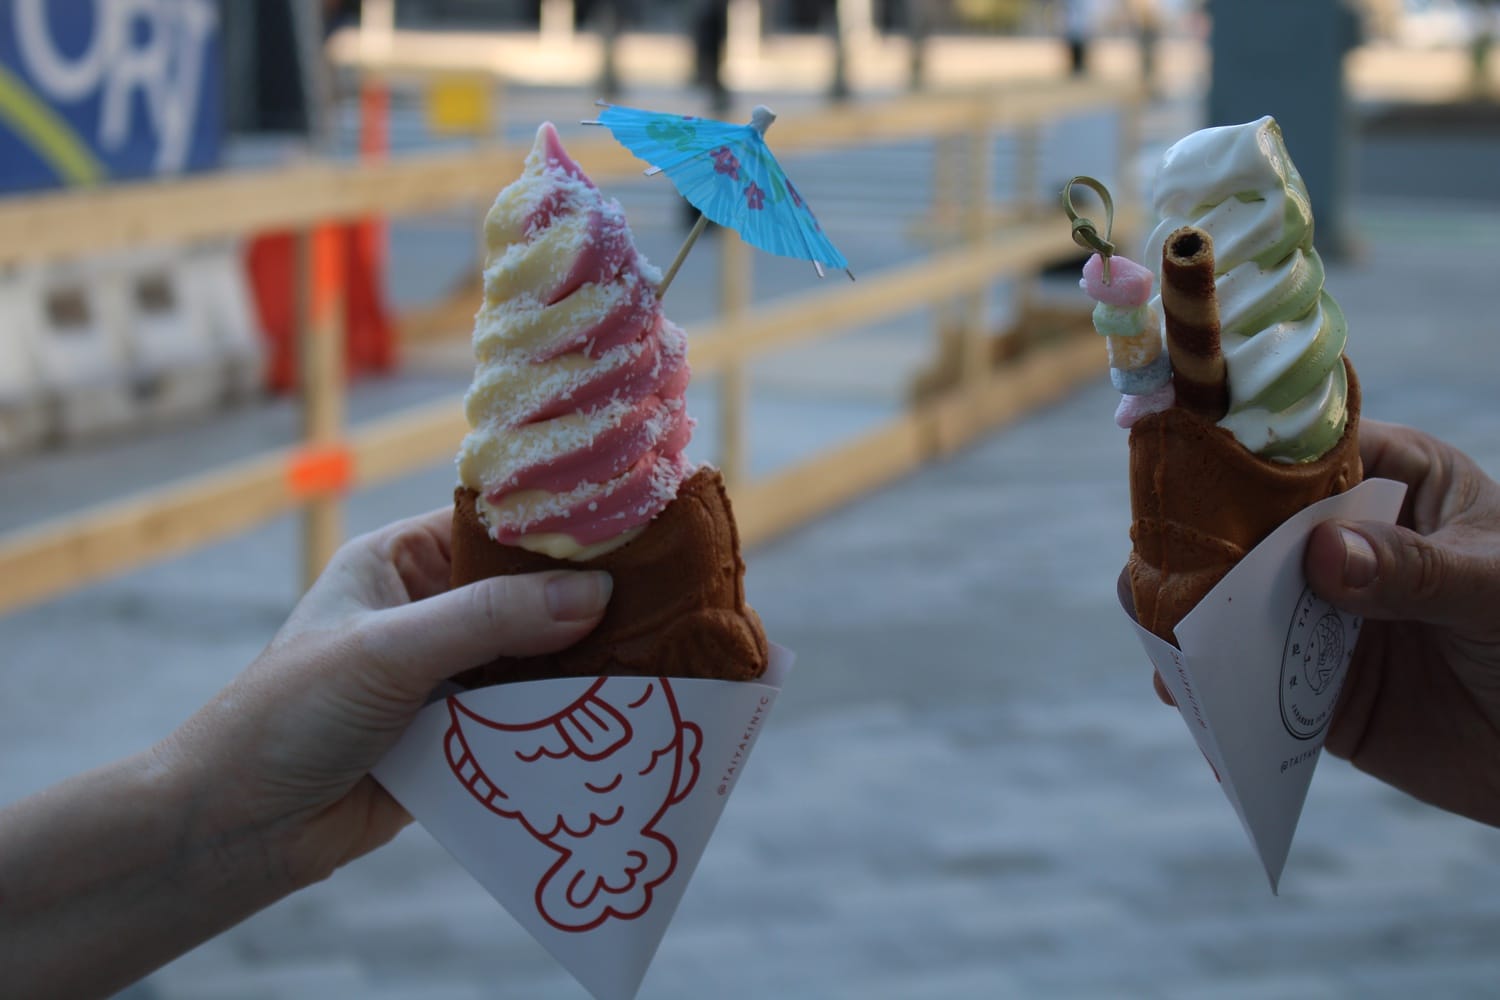 Taiyaki NYC’s cones are an adaptation of an eponymous traditional Japanese treat.